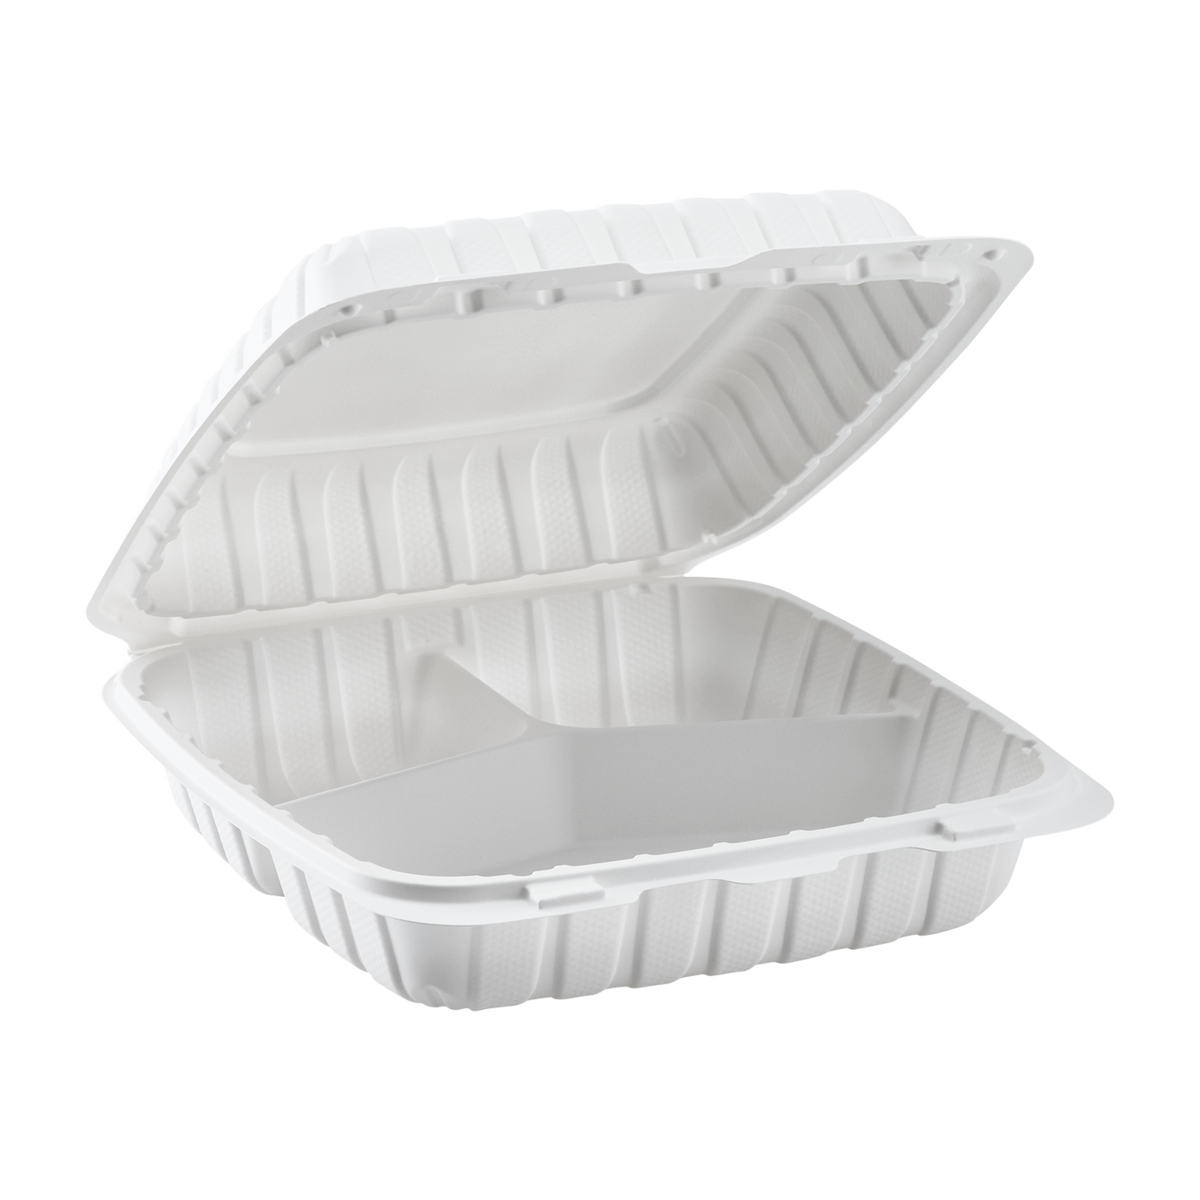 TAKE-OUT/ Container Large, 3 Comp, White 200/cs-Food Service – Croaker, Inc